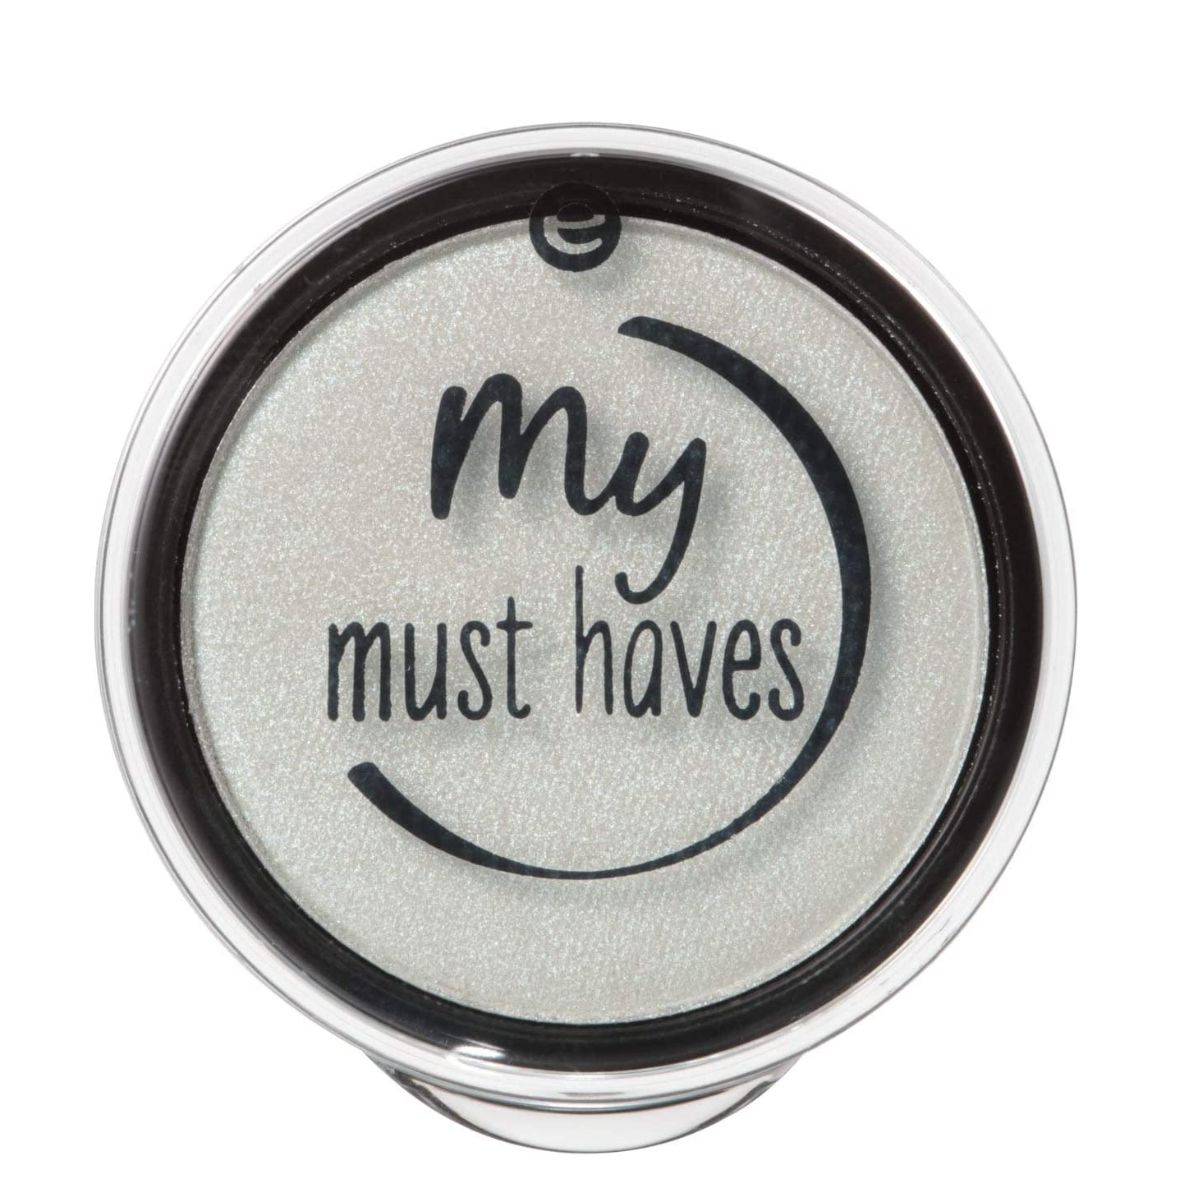 ESSENCE MY MUST HAVES HOLO POWDER